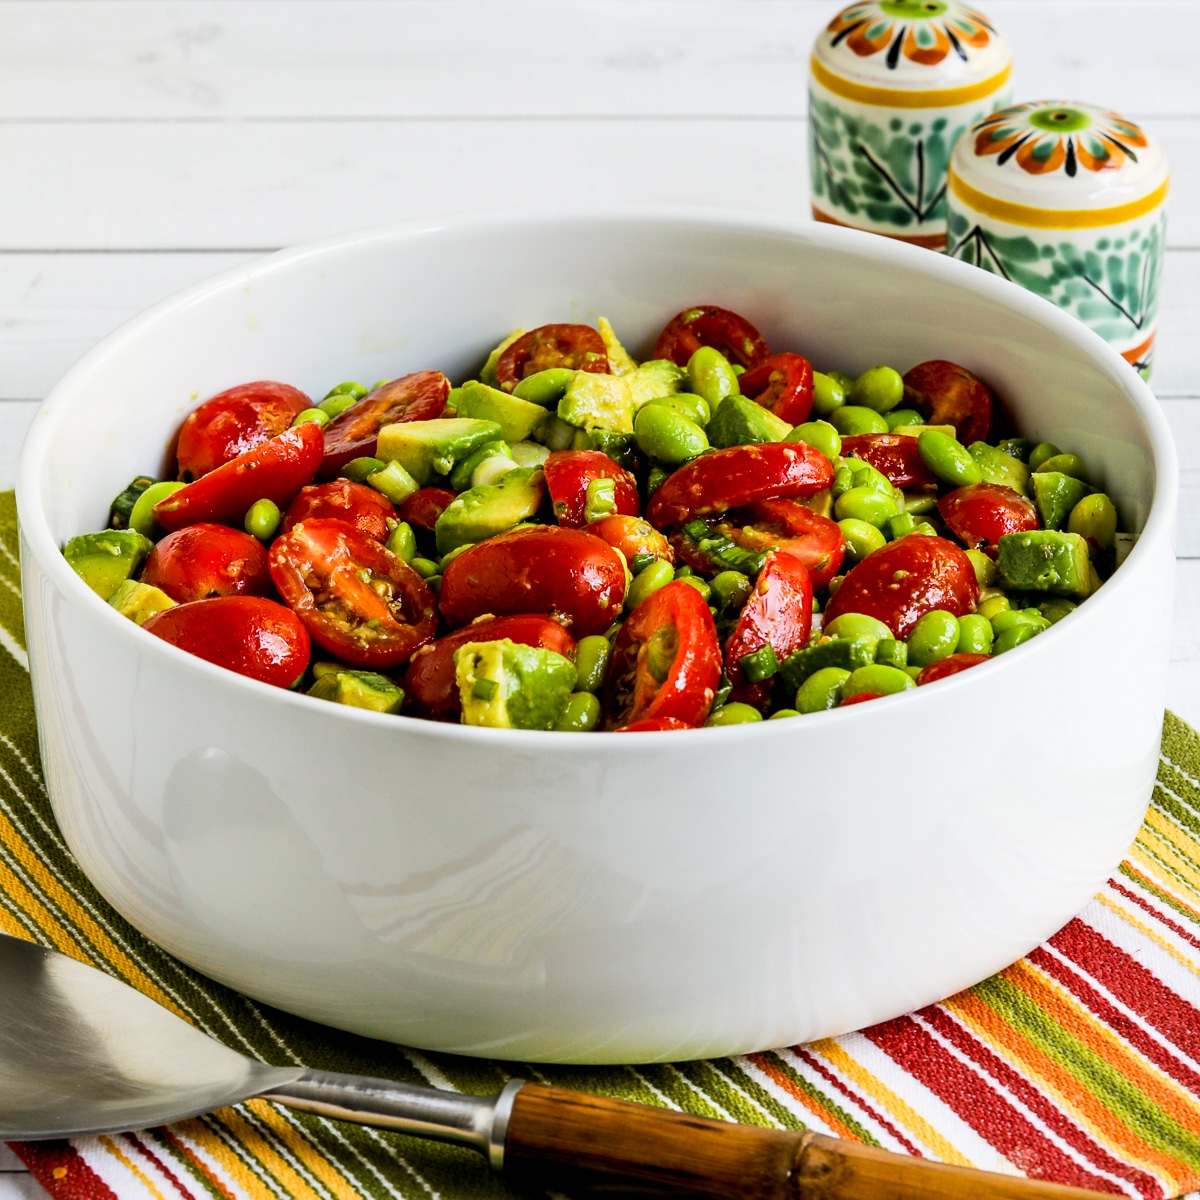 Square photo of tomato and avocado salad with edamame, shown in serving bowl.